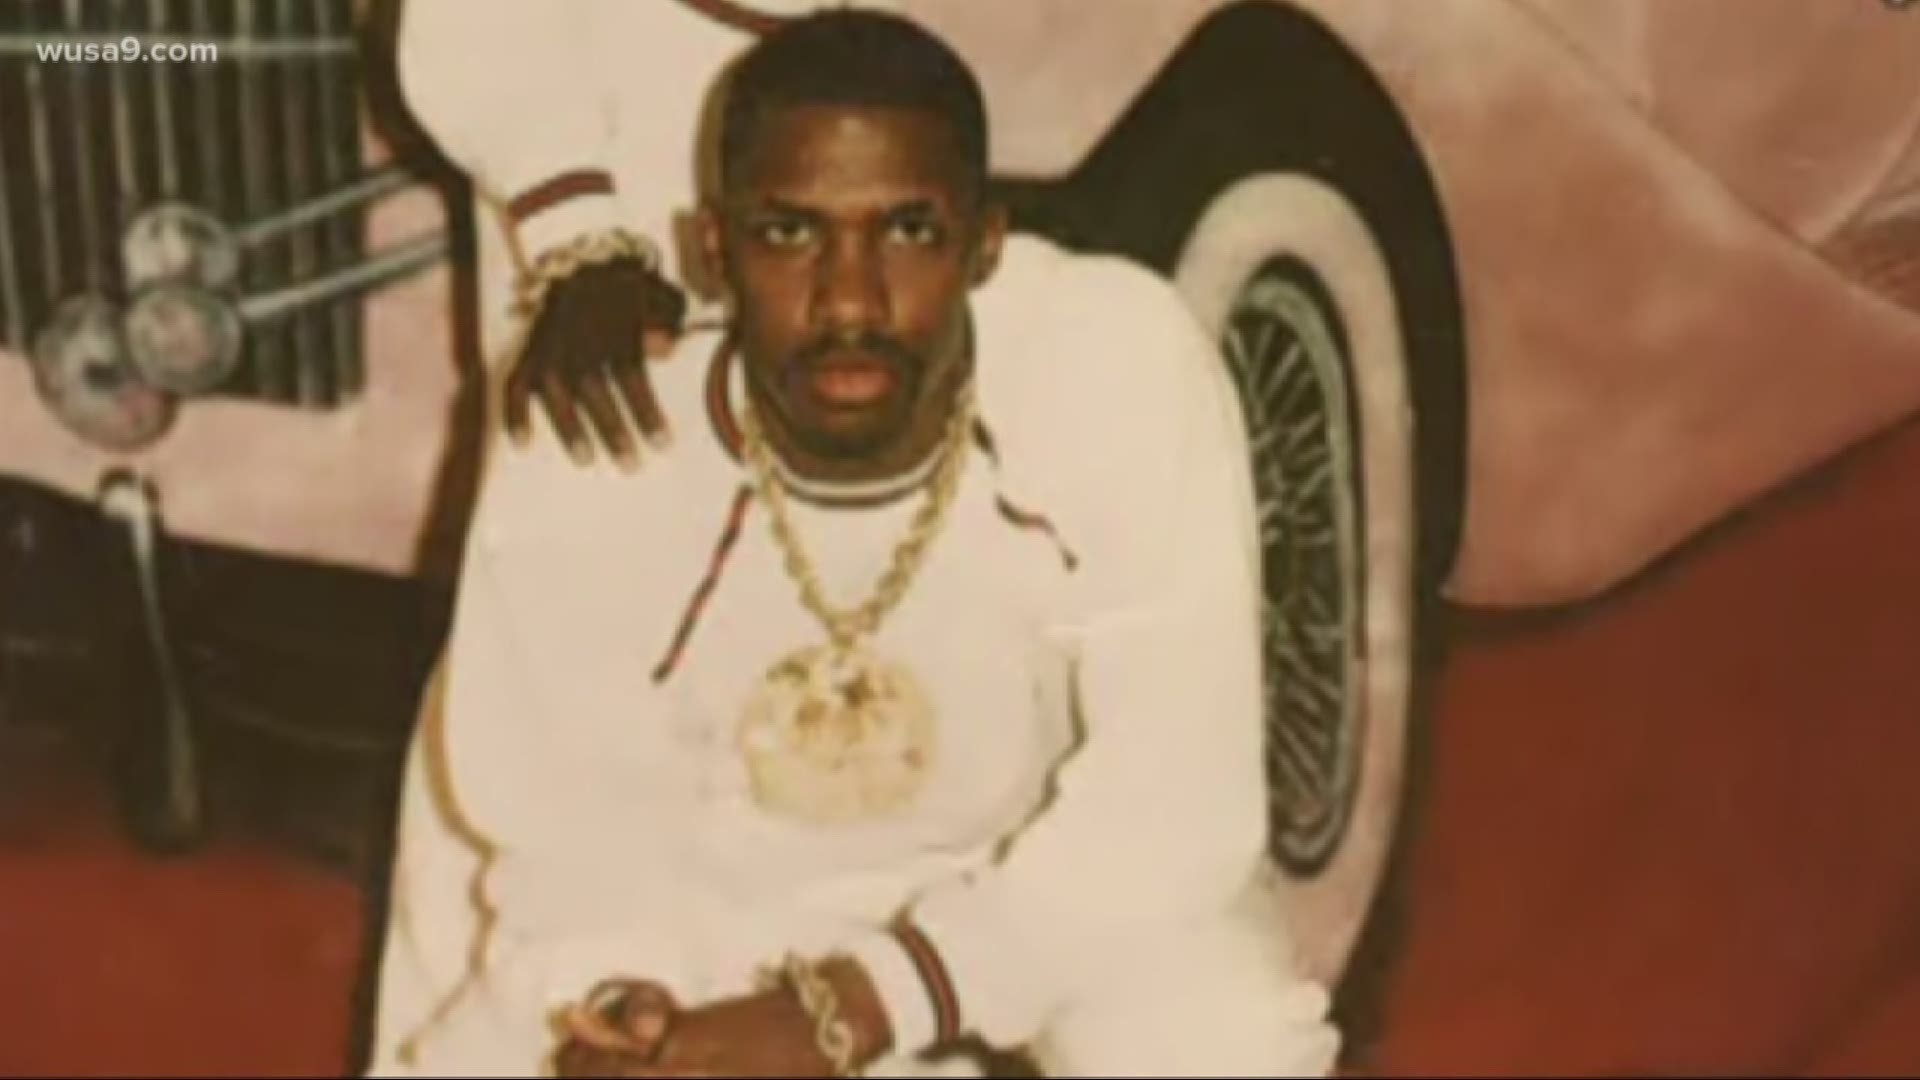 Rayful Edmond appeared in front of a federal judge in a bid to have his life without parole sentence reduced to the 30-plus years he's already served.